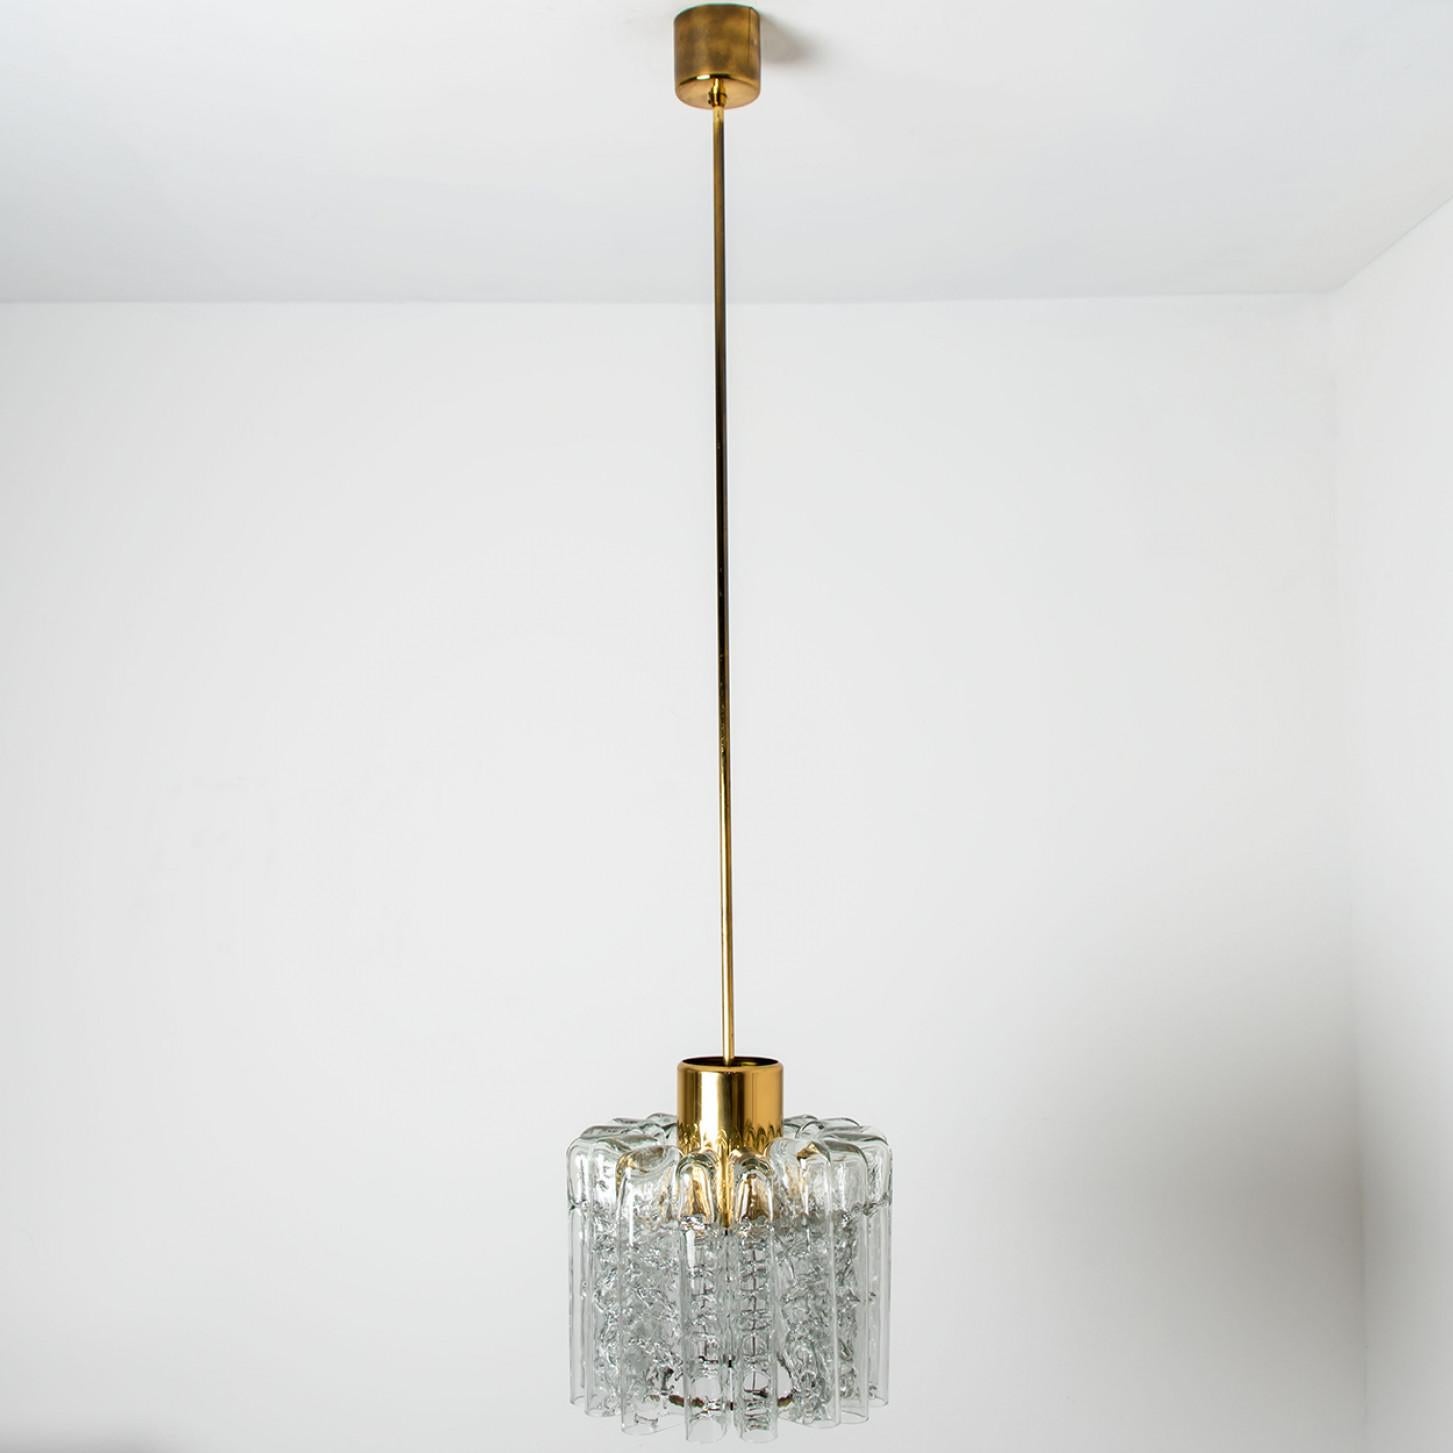 1 of the 2 Round Textured Clear Glass Doria Pendant Lamp, 1960s For Sale 2